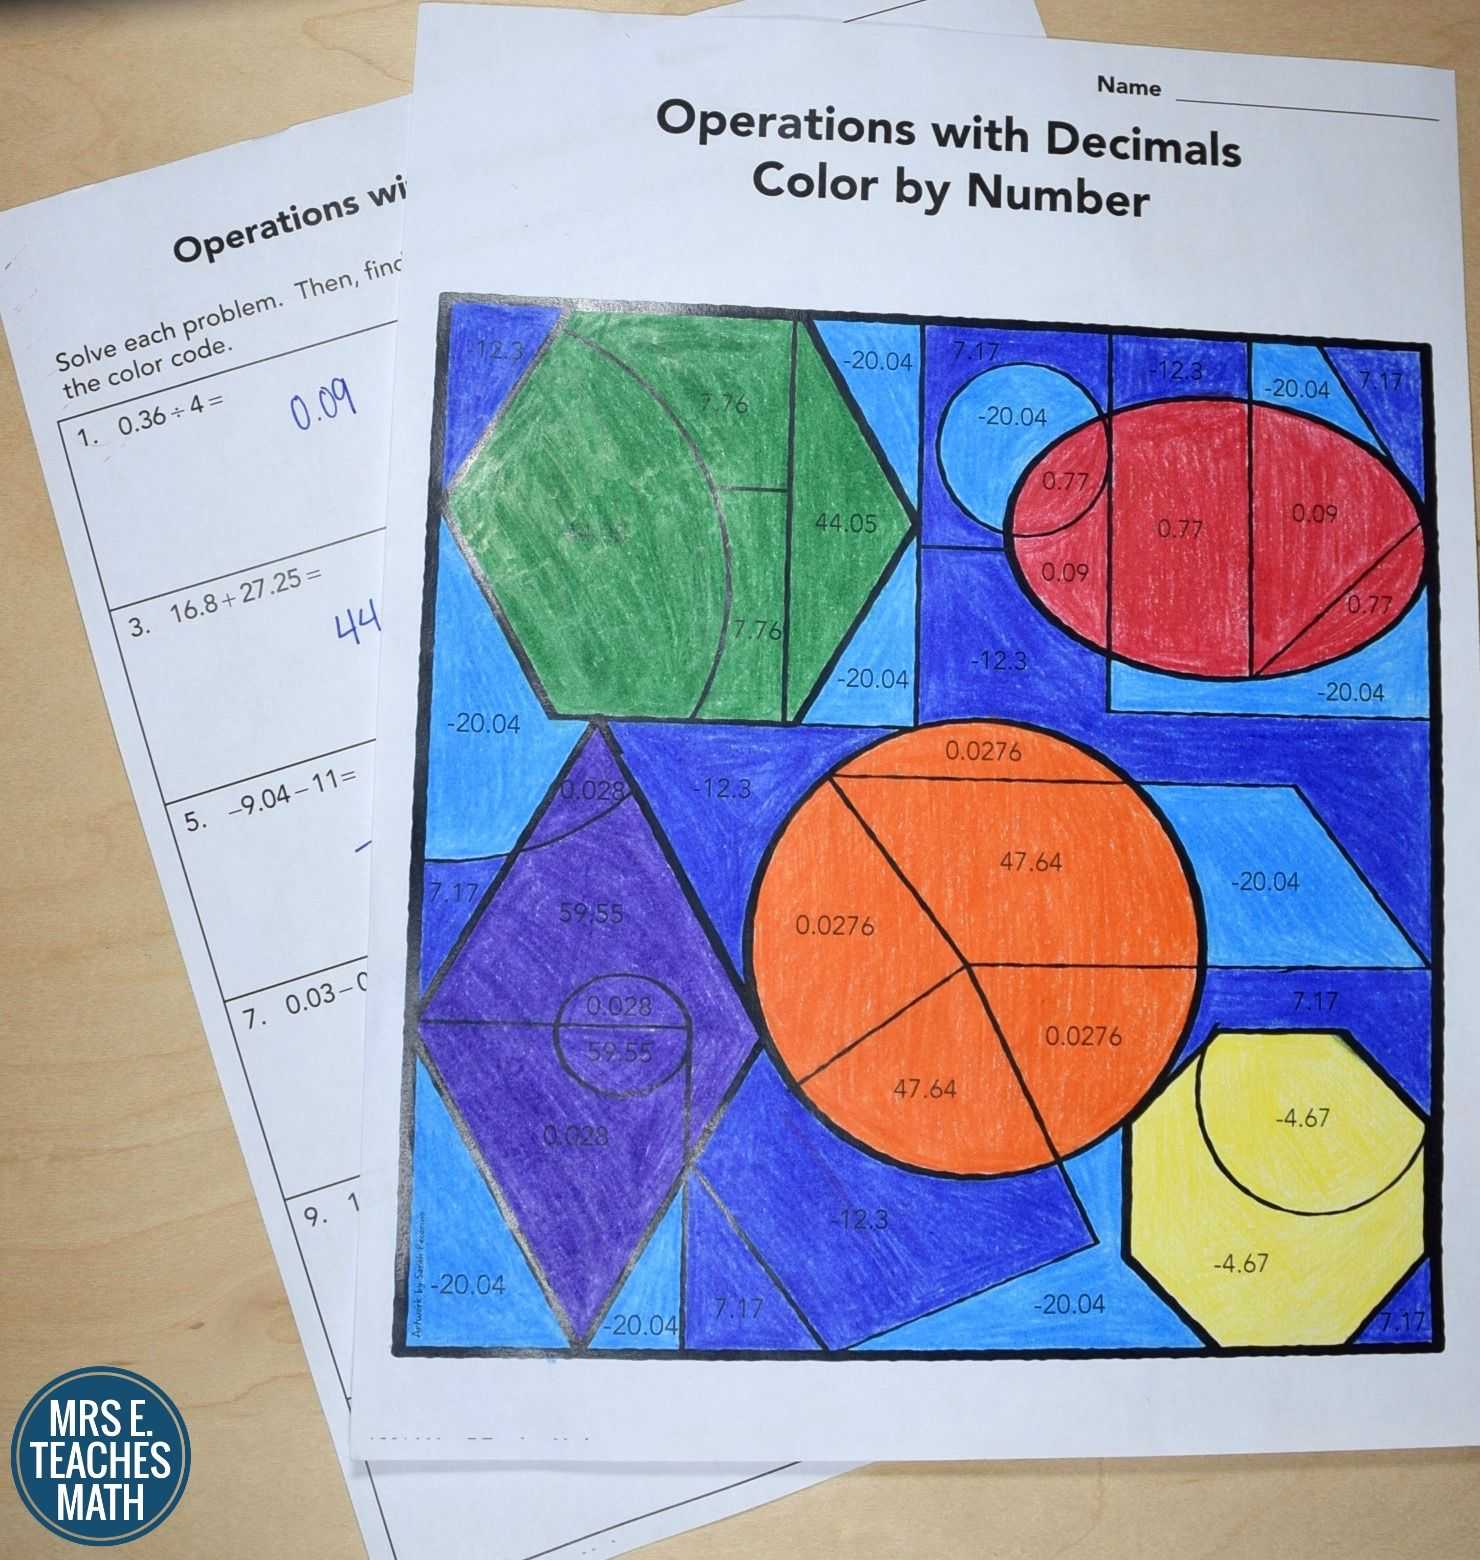 Decimal Multiplication and Division Worksheet or Operations with Decimals Color by Number This Activity Includes